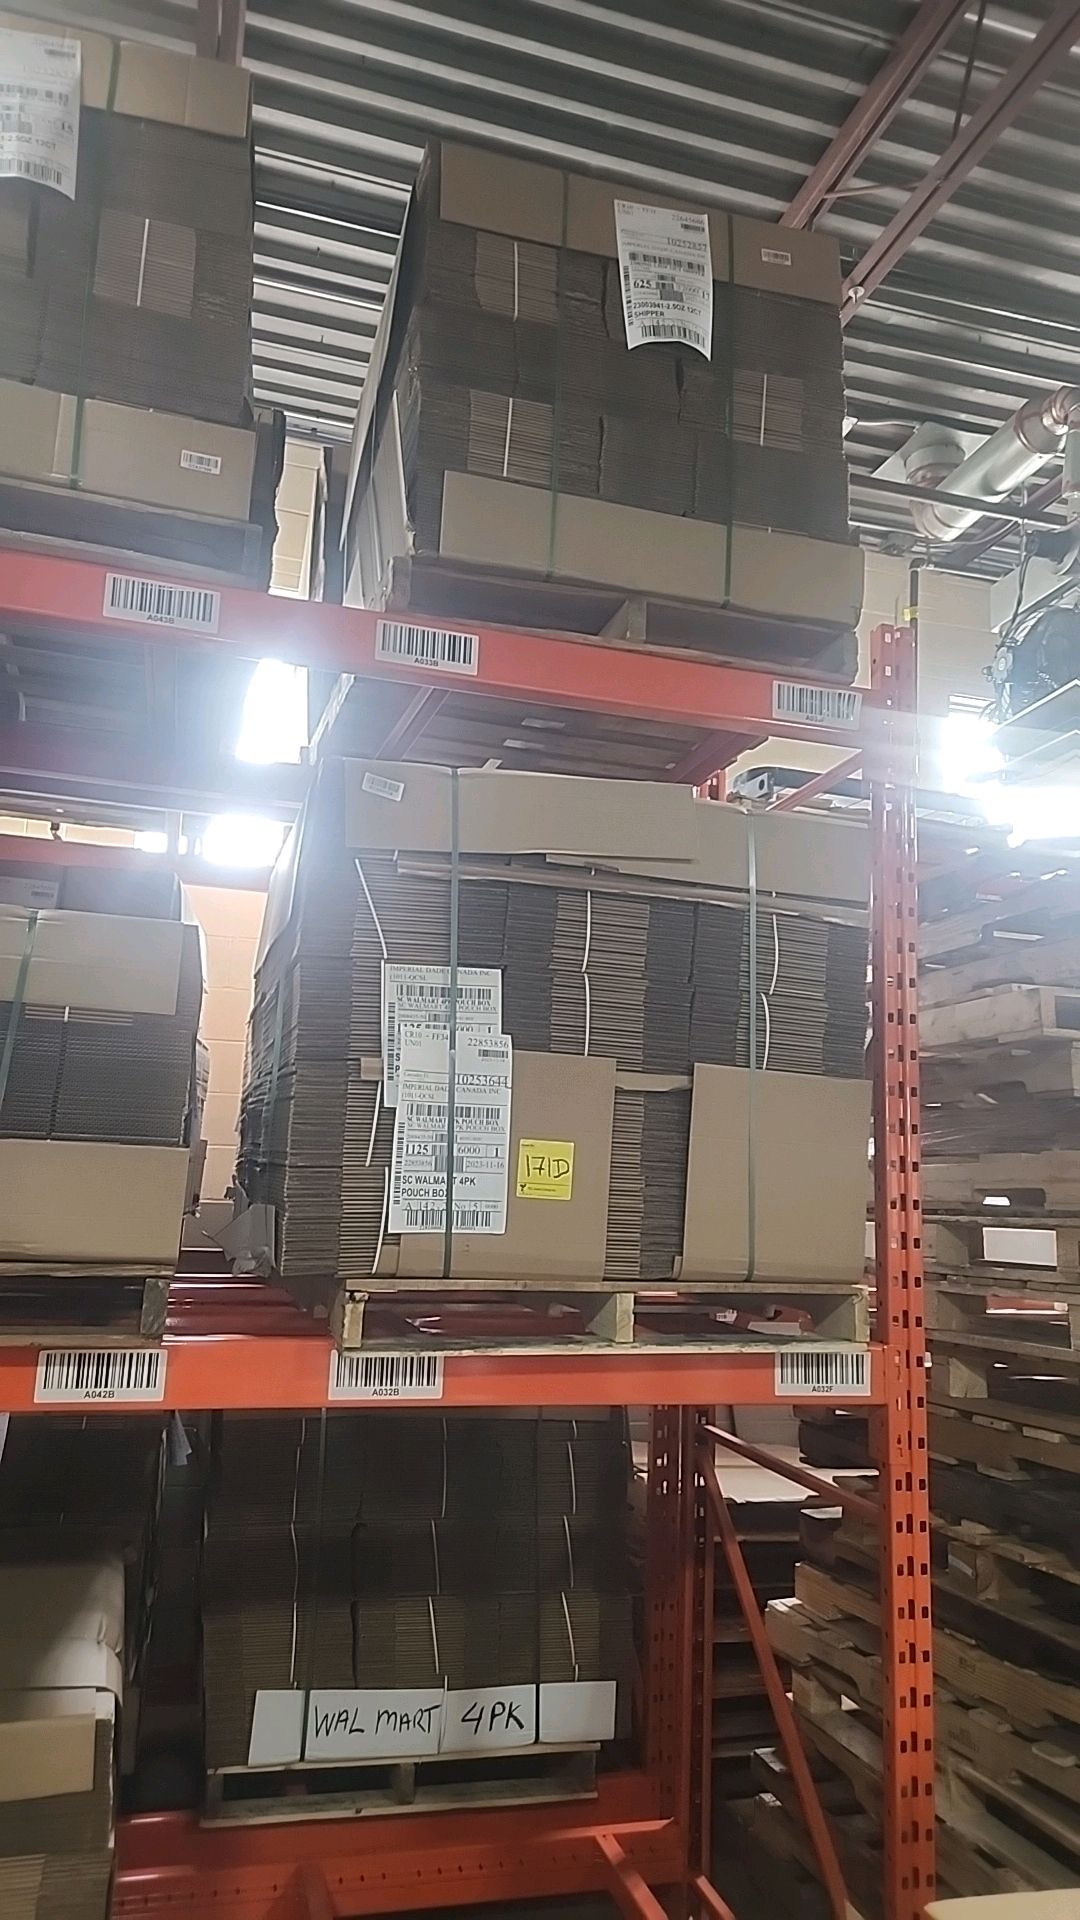 (approx. 2,250/5 pallets) NEW NON-BRANDED corrugated boxes, SC Walmart 4PK Pouch Box, approx. 7.5